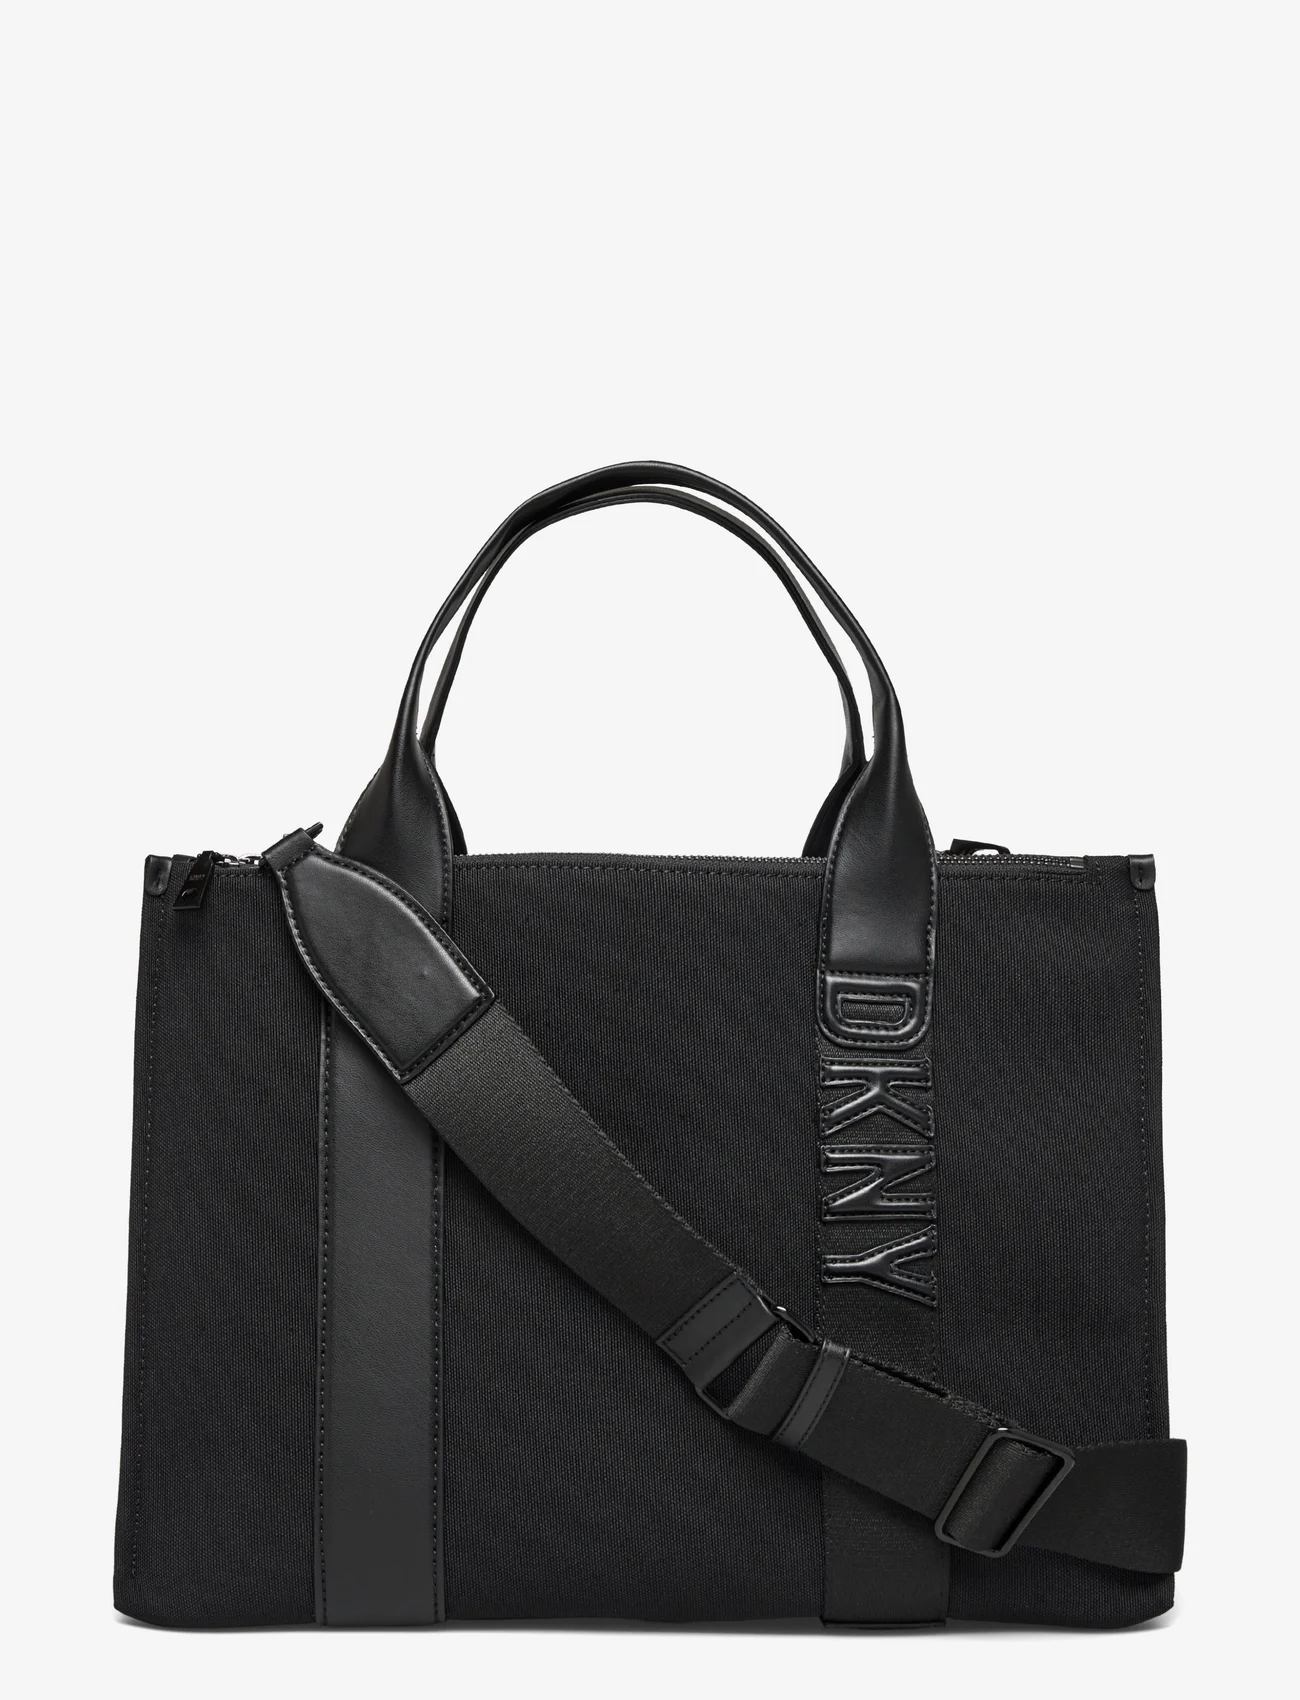 DKNY Bags - HOLLY MD TOTE - totes - bbl - blk/black - 0